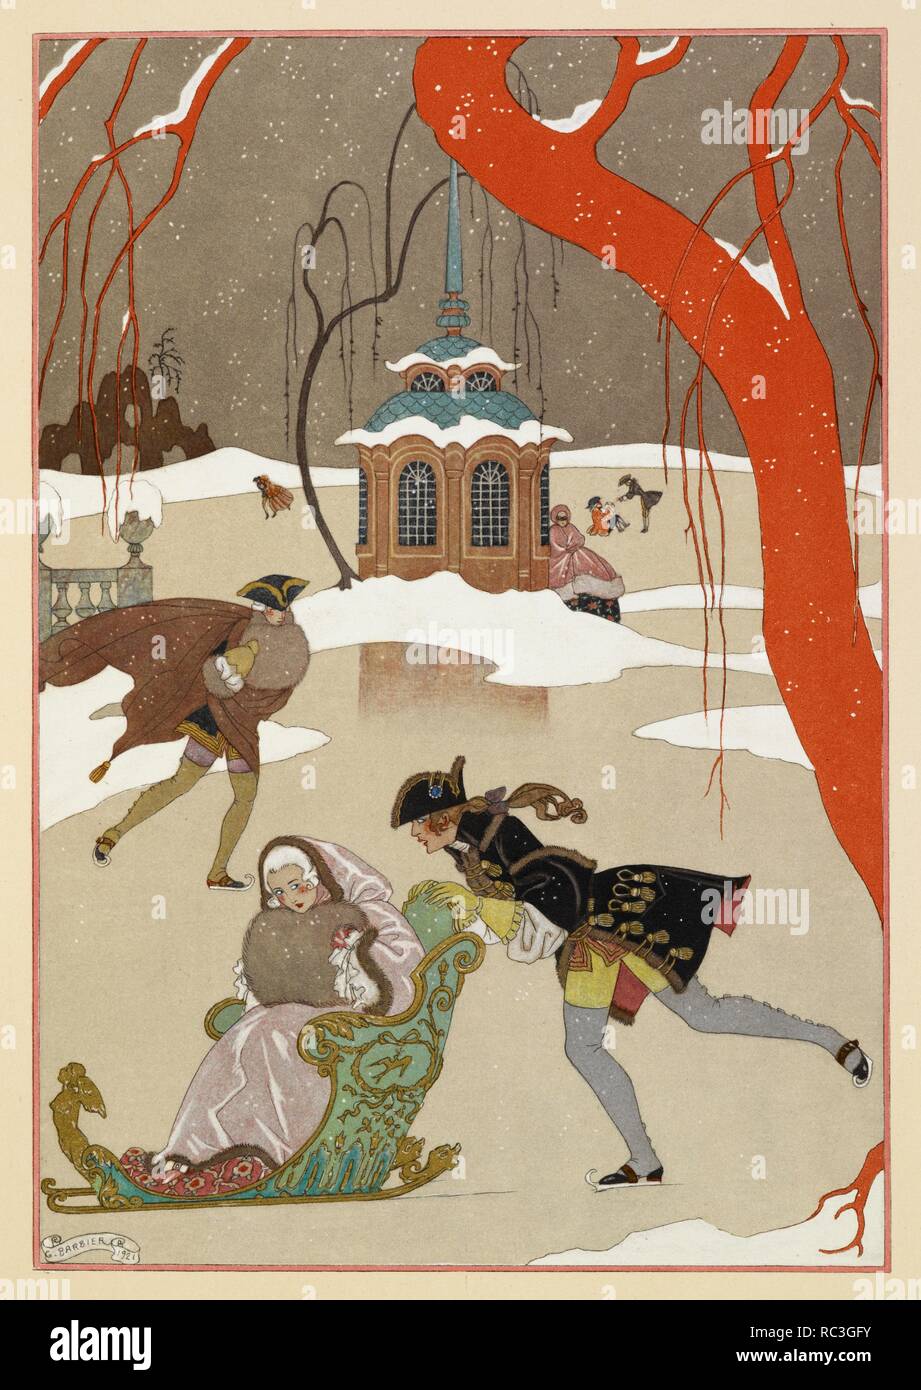 'En patinant'. People ice skating. A woman seated in a sled. FÃªtes galantes. [PoÃ¨mes]. Illustrations de George Barbier. Paris: H. Piazza, 1928. A winter scene. FÃªtes Galantes is an album consisting of romantic prints of French life among the upper classes of the 19th century. Rich aristocrats of the French court used to play gallant scenes from the commedia dellâ€™ arte that were called Fetes Galantes. The prints accompany Paul Verlaine's poetry. Each album contains 20 lithograph prints with pochoir highlighting by George Barbier. Source: L.45/2847. Language: French. Stock Photo